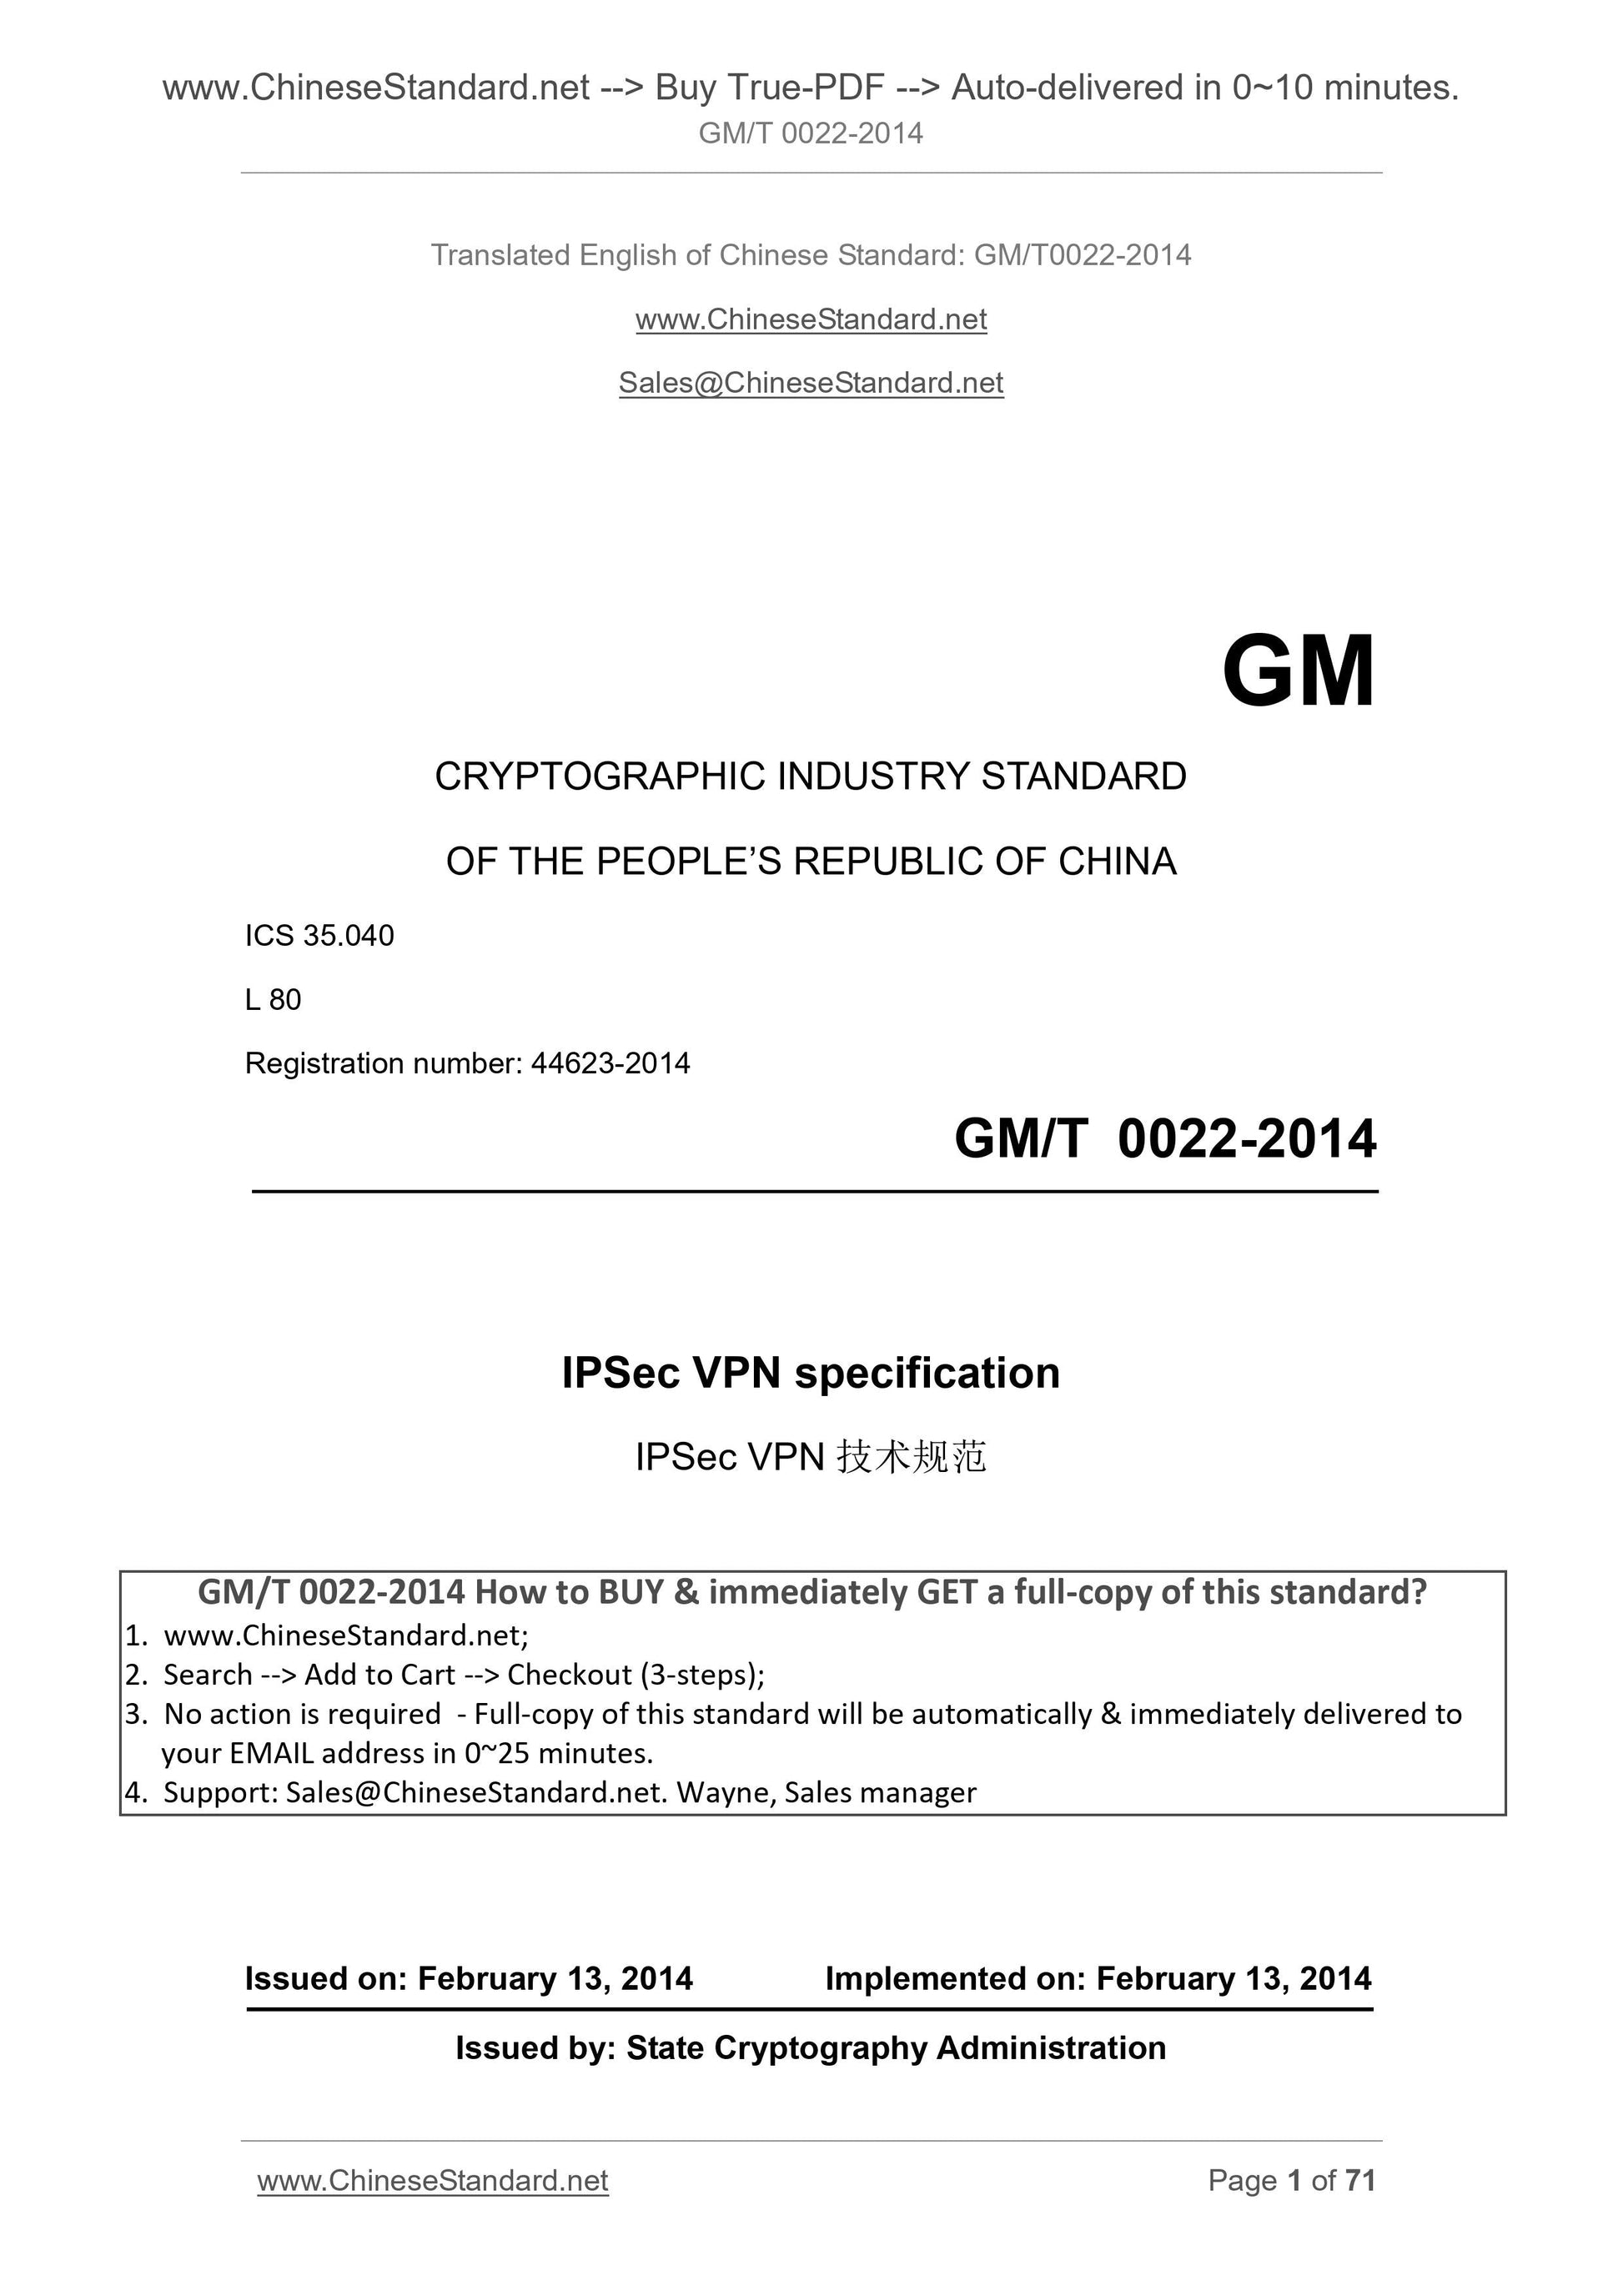 GM/T 0022-2014 Page 1